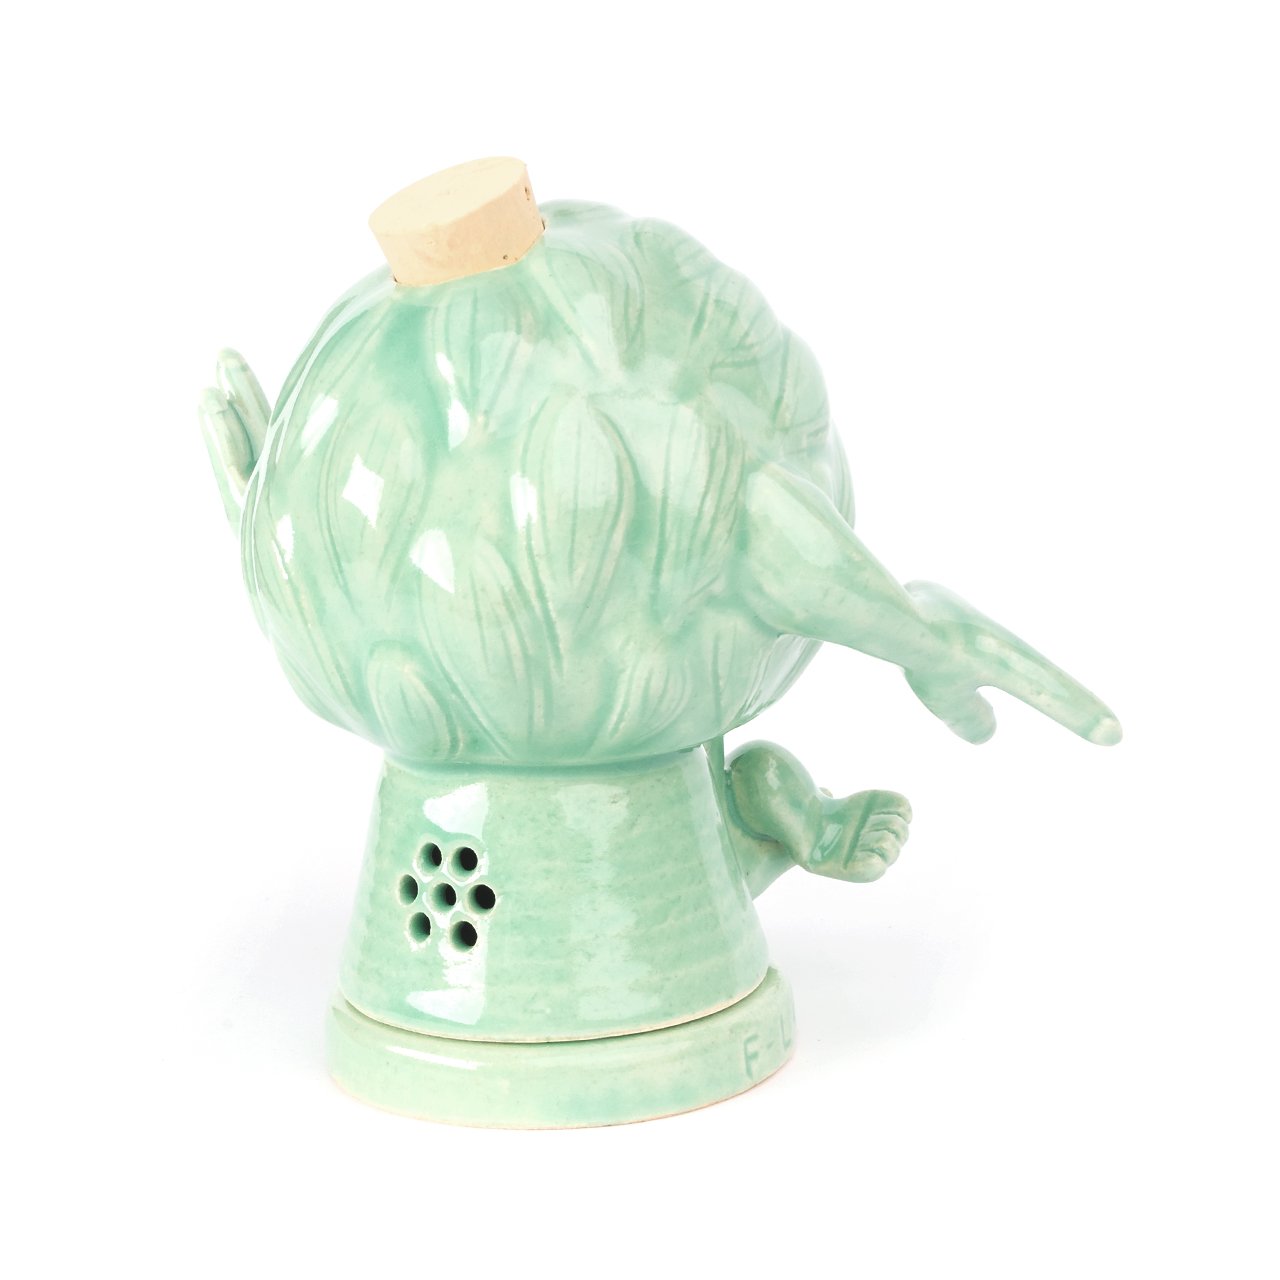 flagstuff "monster" incense chamber (green) - 20ss-fs-69 - a.plus - Image - 2